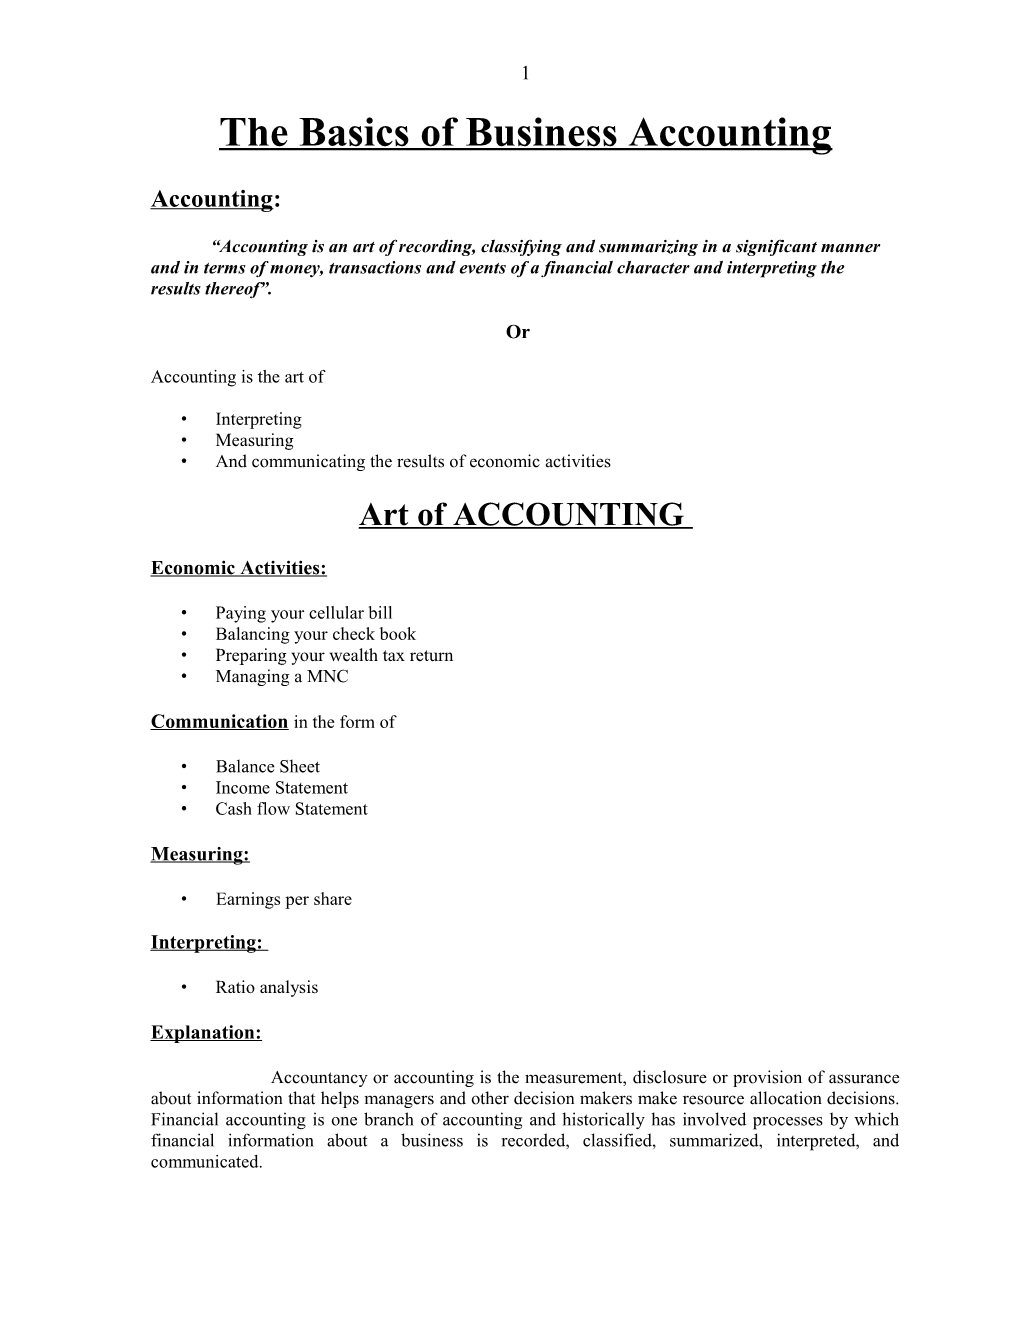 The Basics of Business Accounting